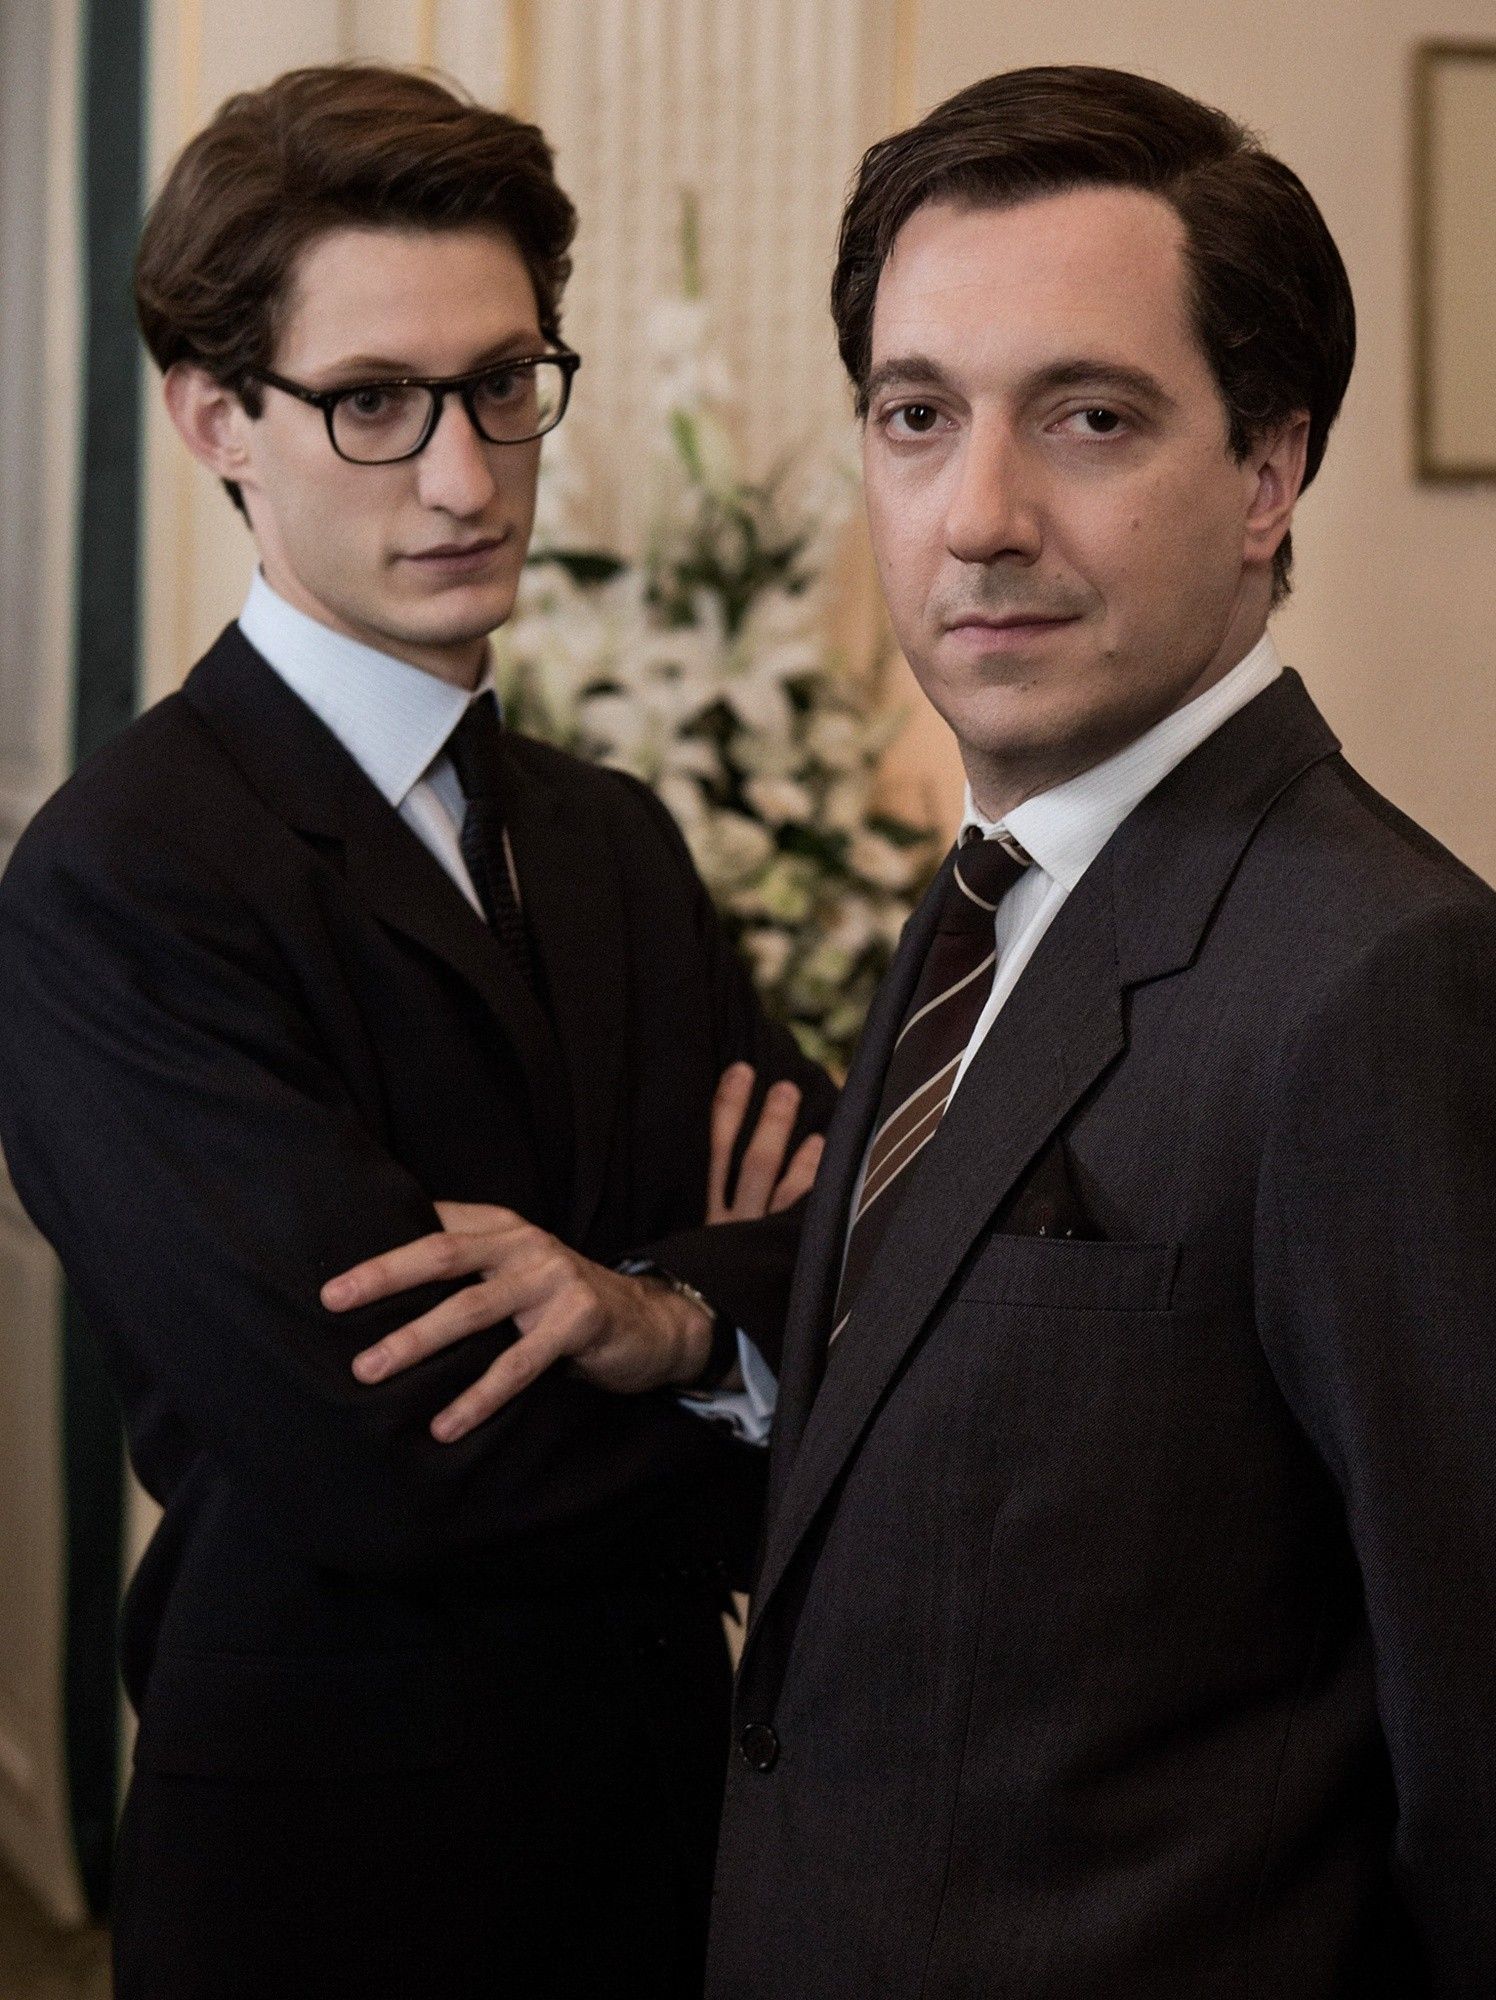 Pierre Niney stars as Yves Saint Laurent and Guillaume Gallienne stars as Pierre Berge in The Weinstein Company's Yves Saint Laurent (2014)